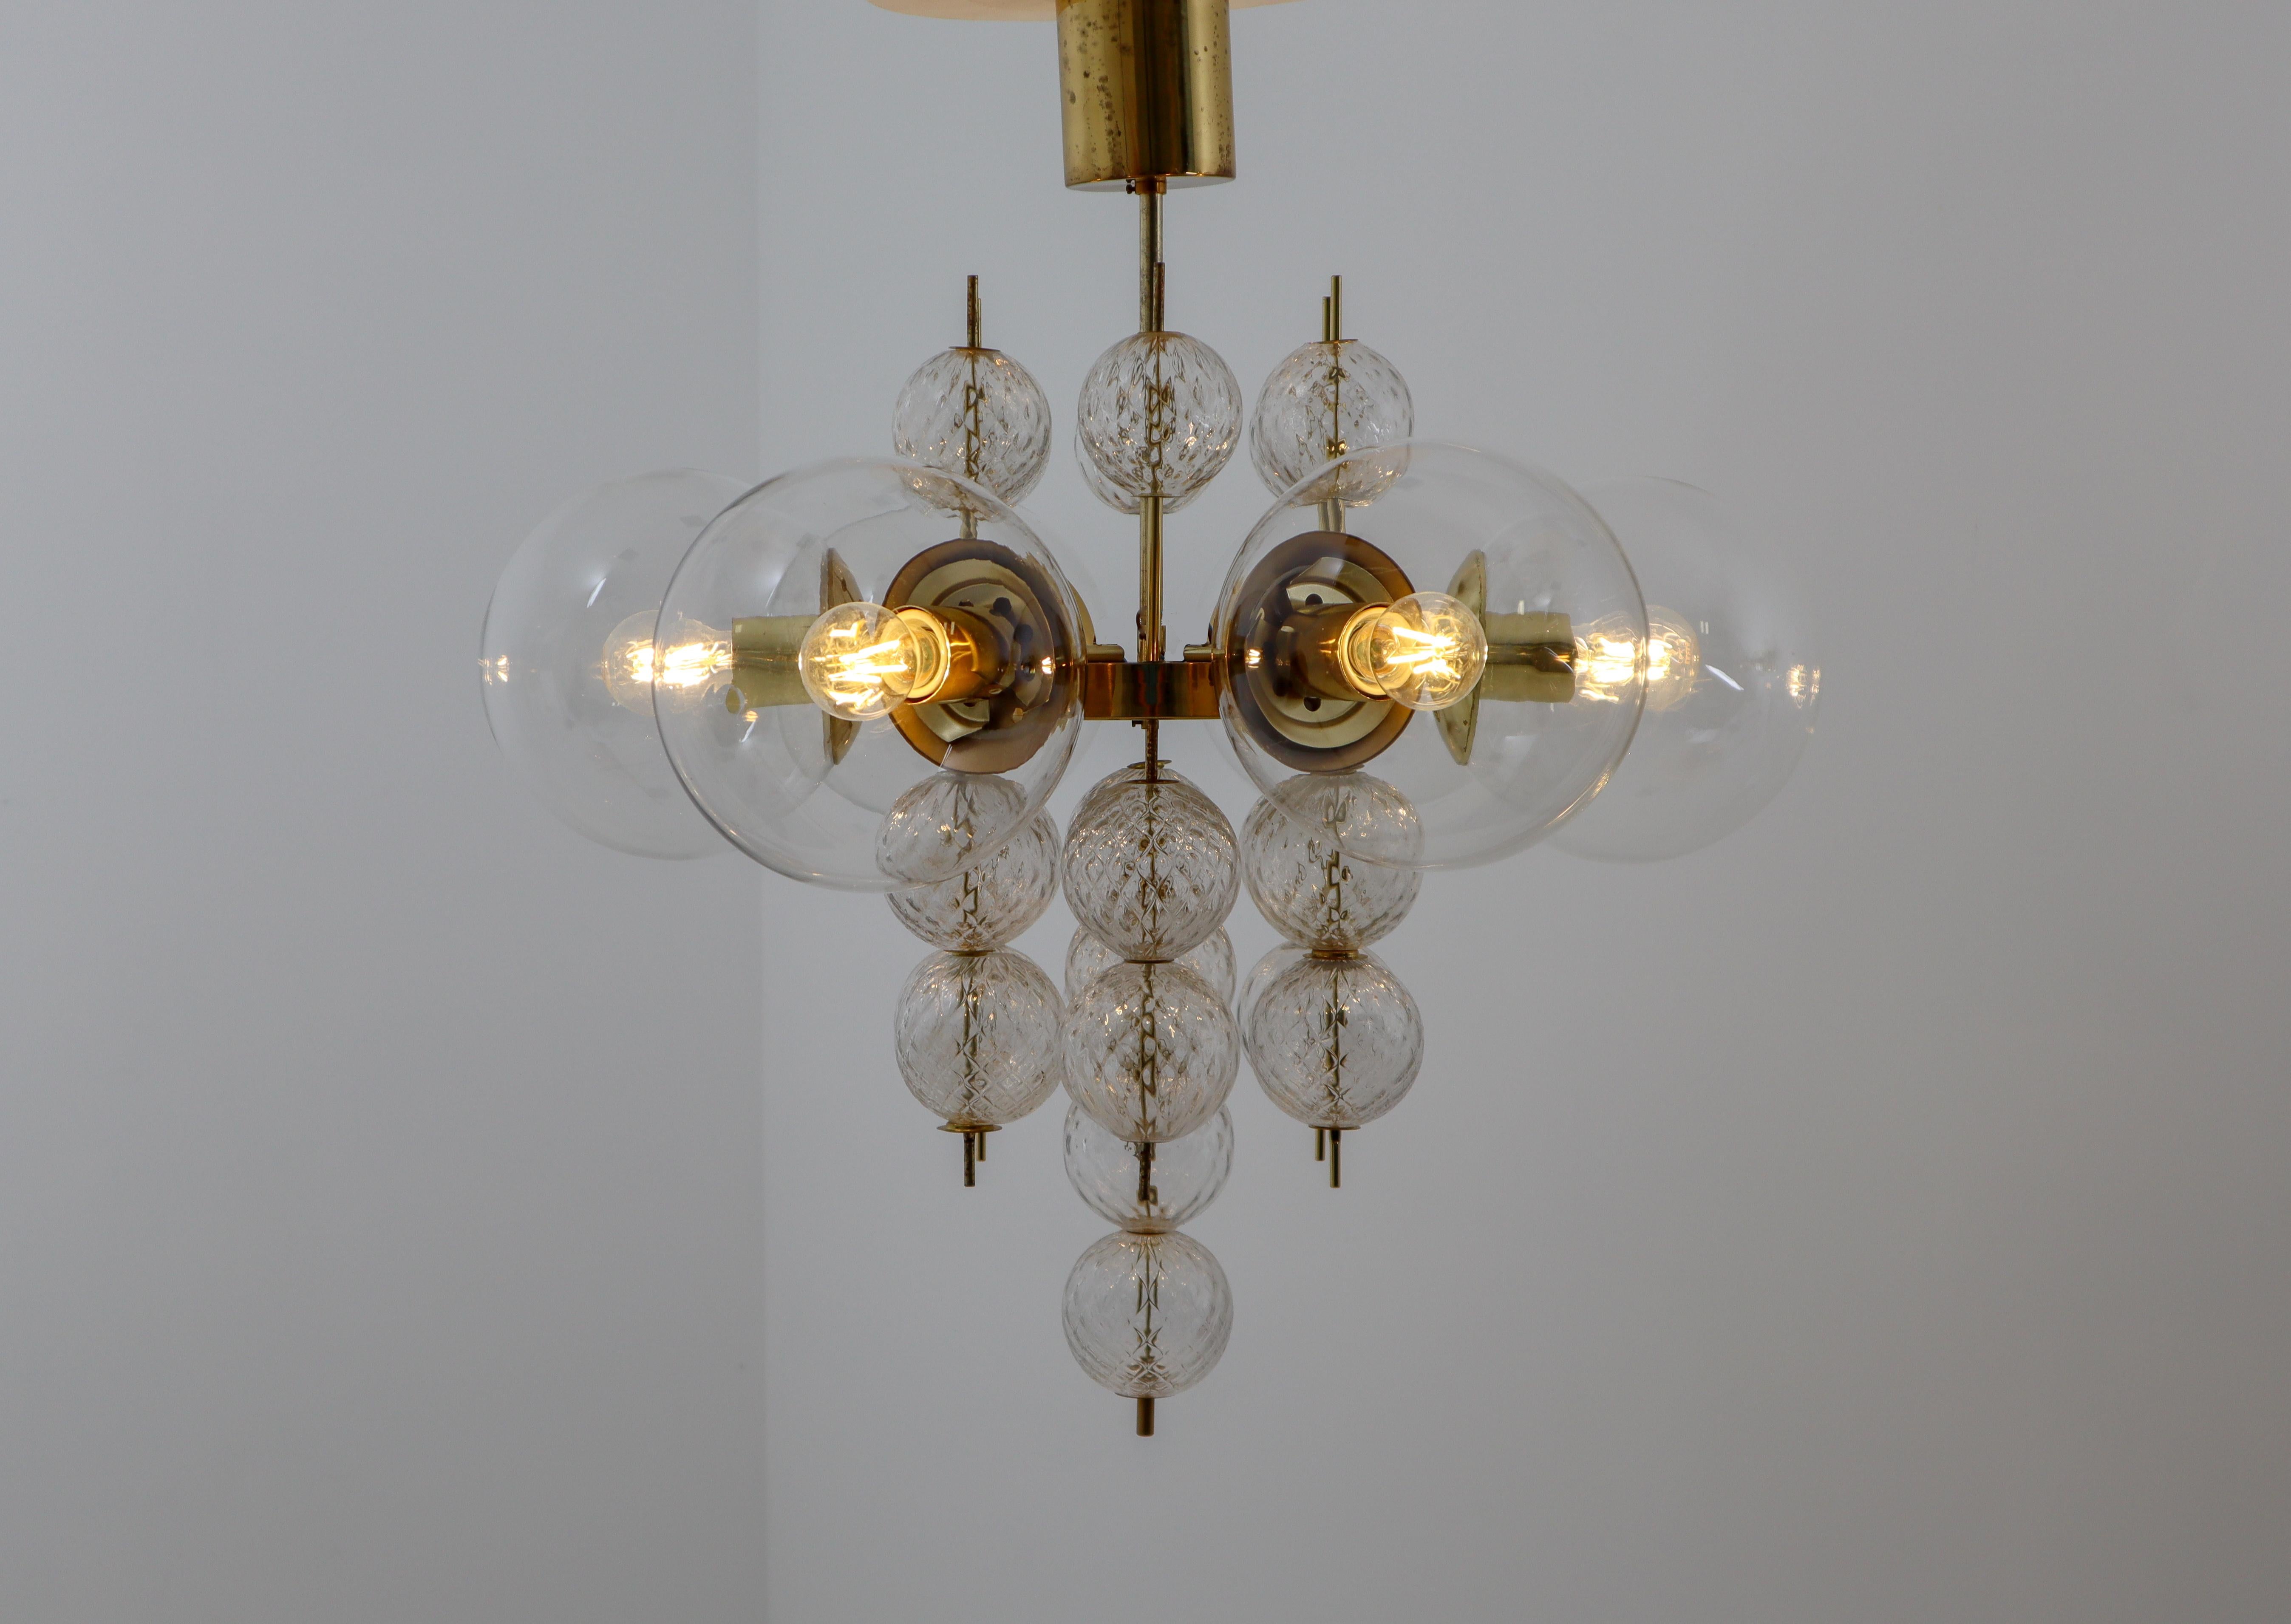 Midcentury Chandeliers with Brass Fixture and Hand-Blown Glass, Europe 1970s For Sale 1